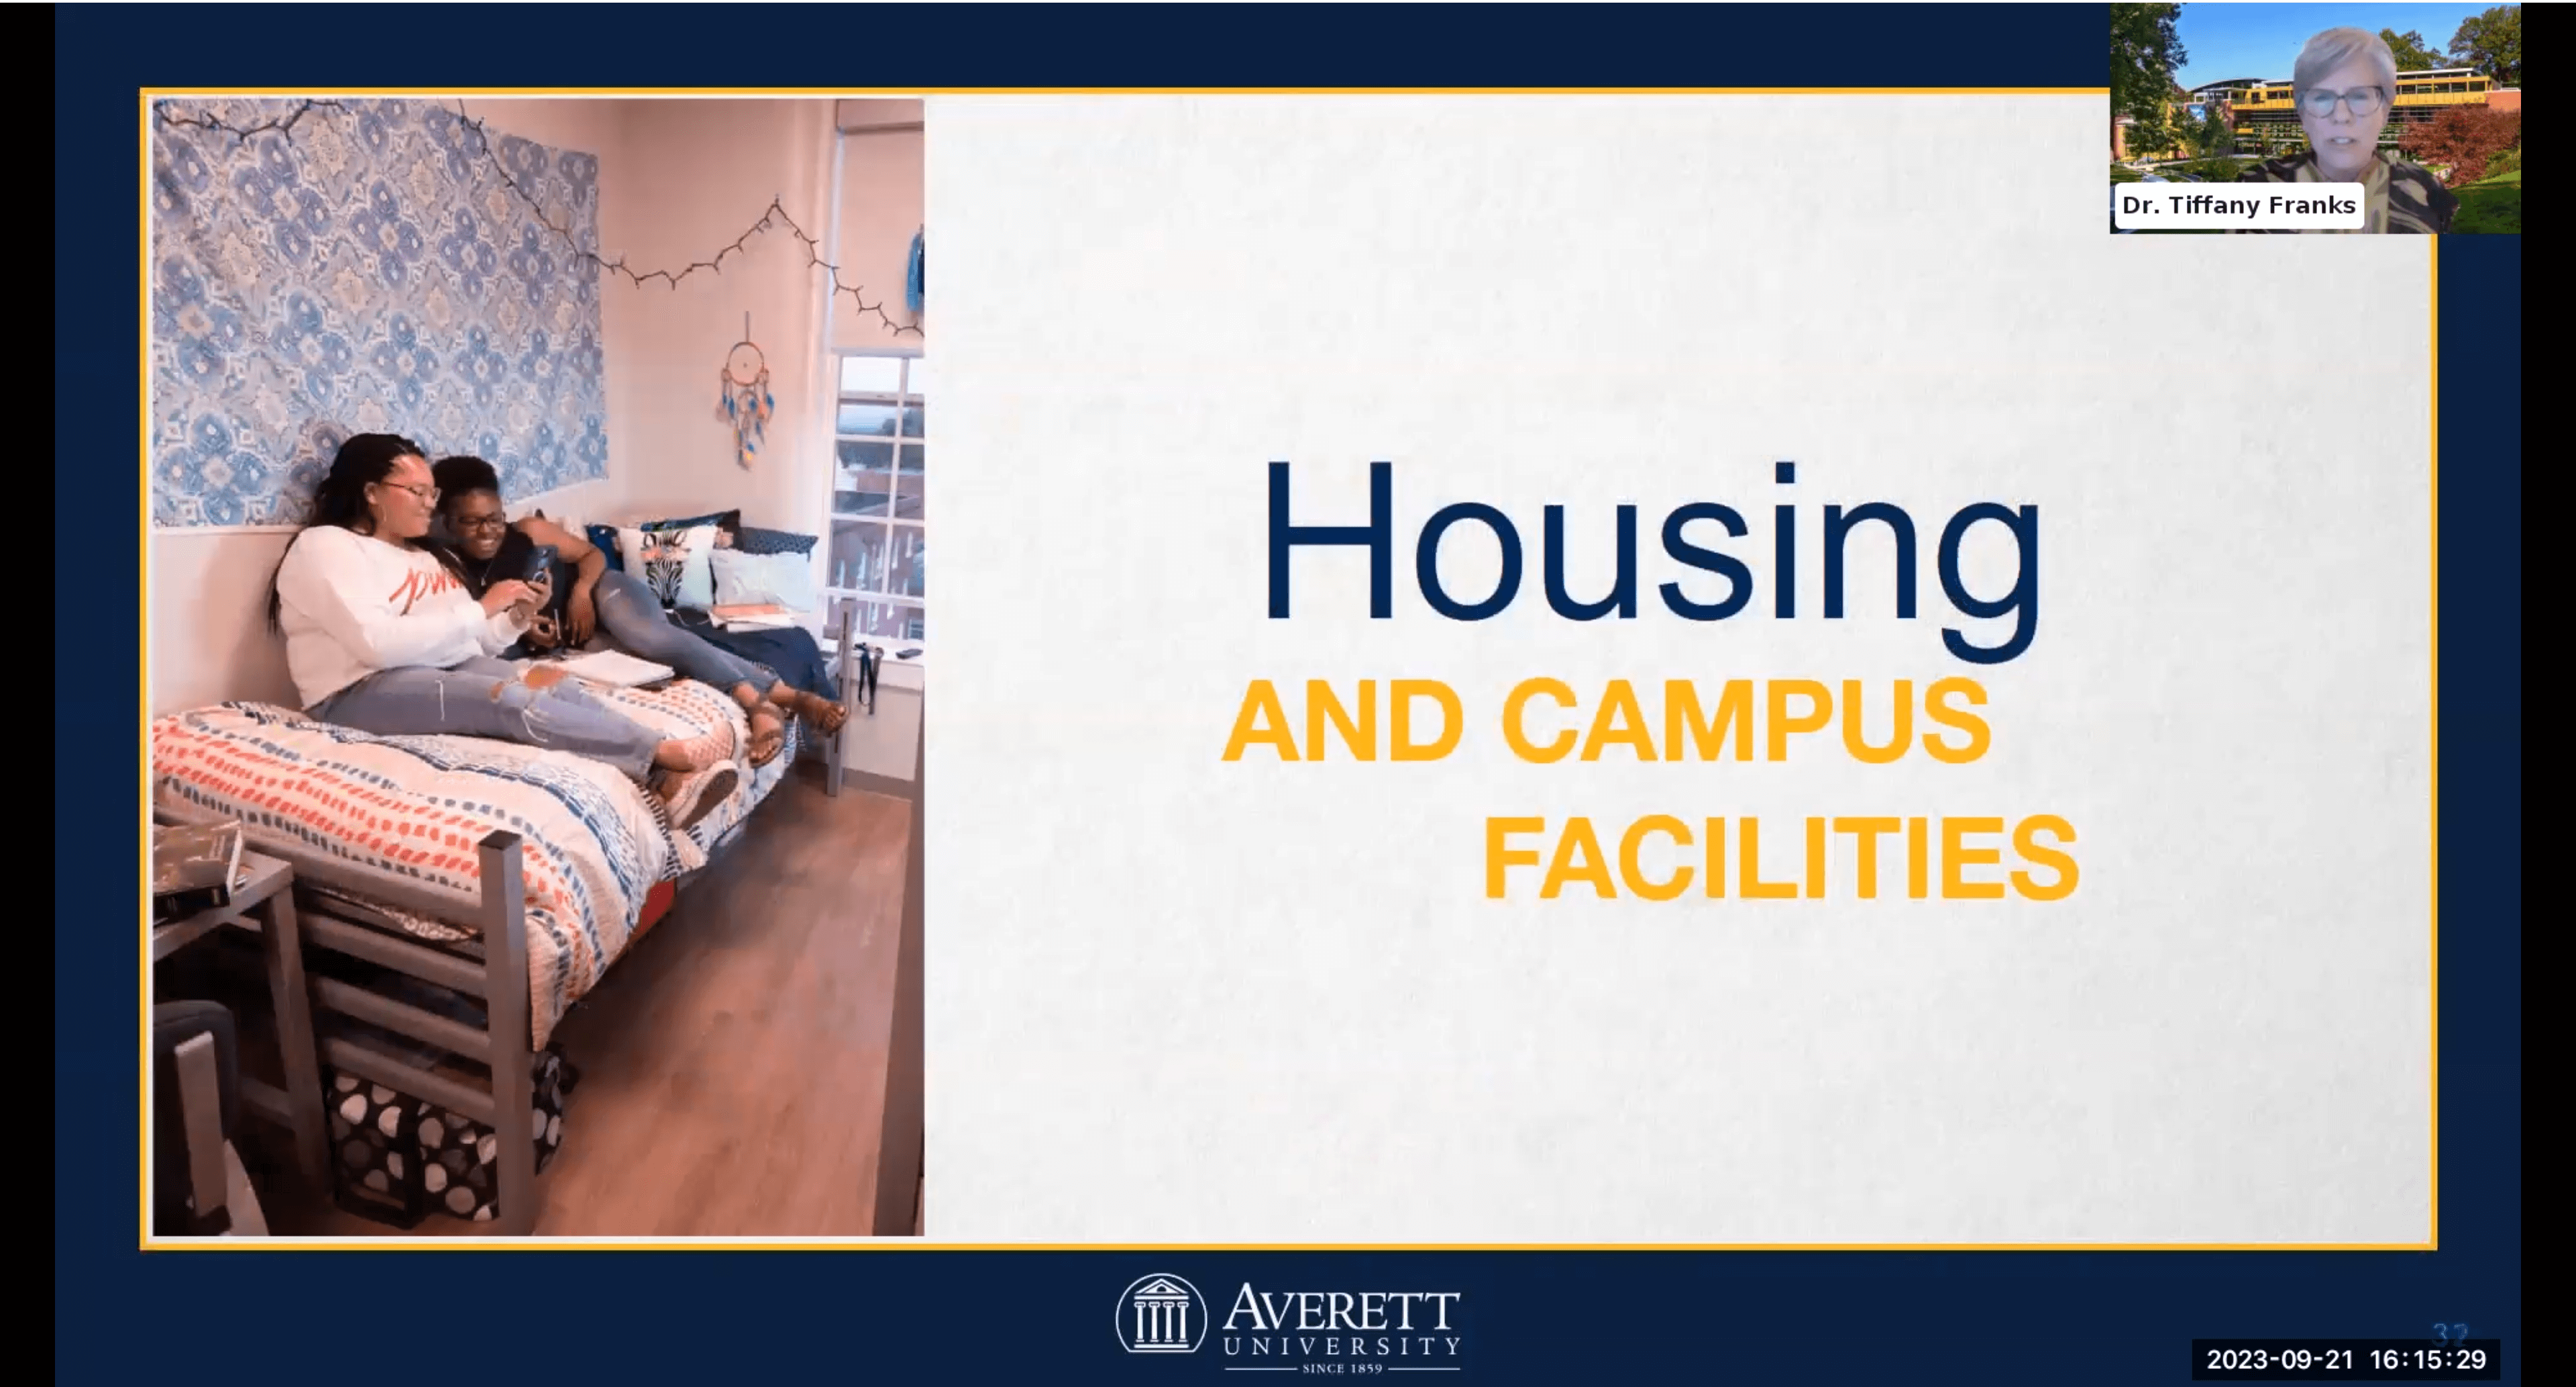 Learn about housing options and communities for first-year students, as well as parking availability